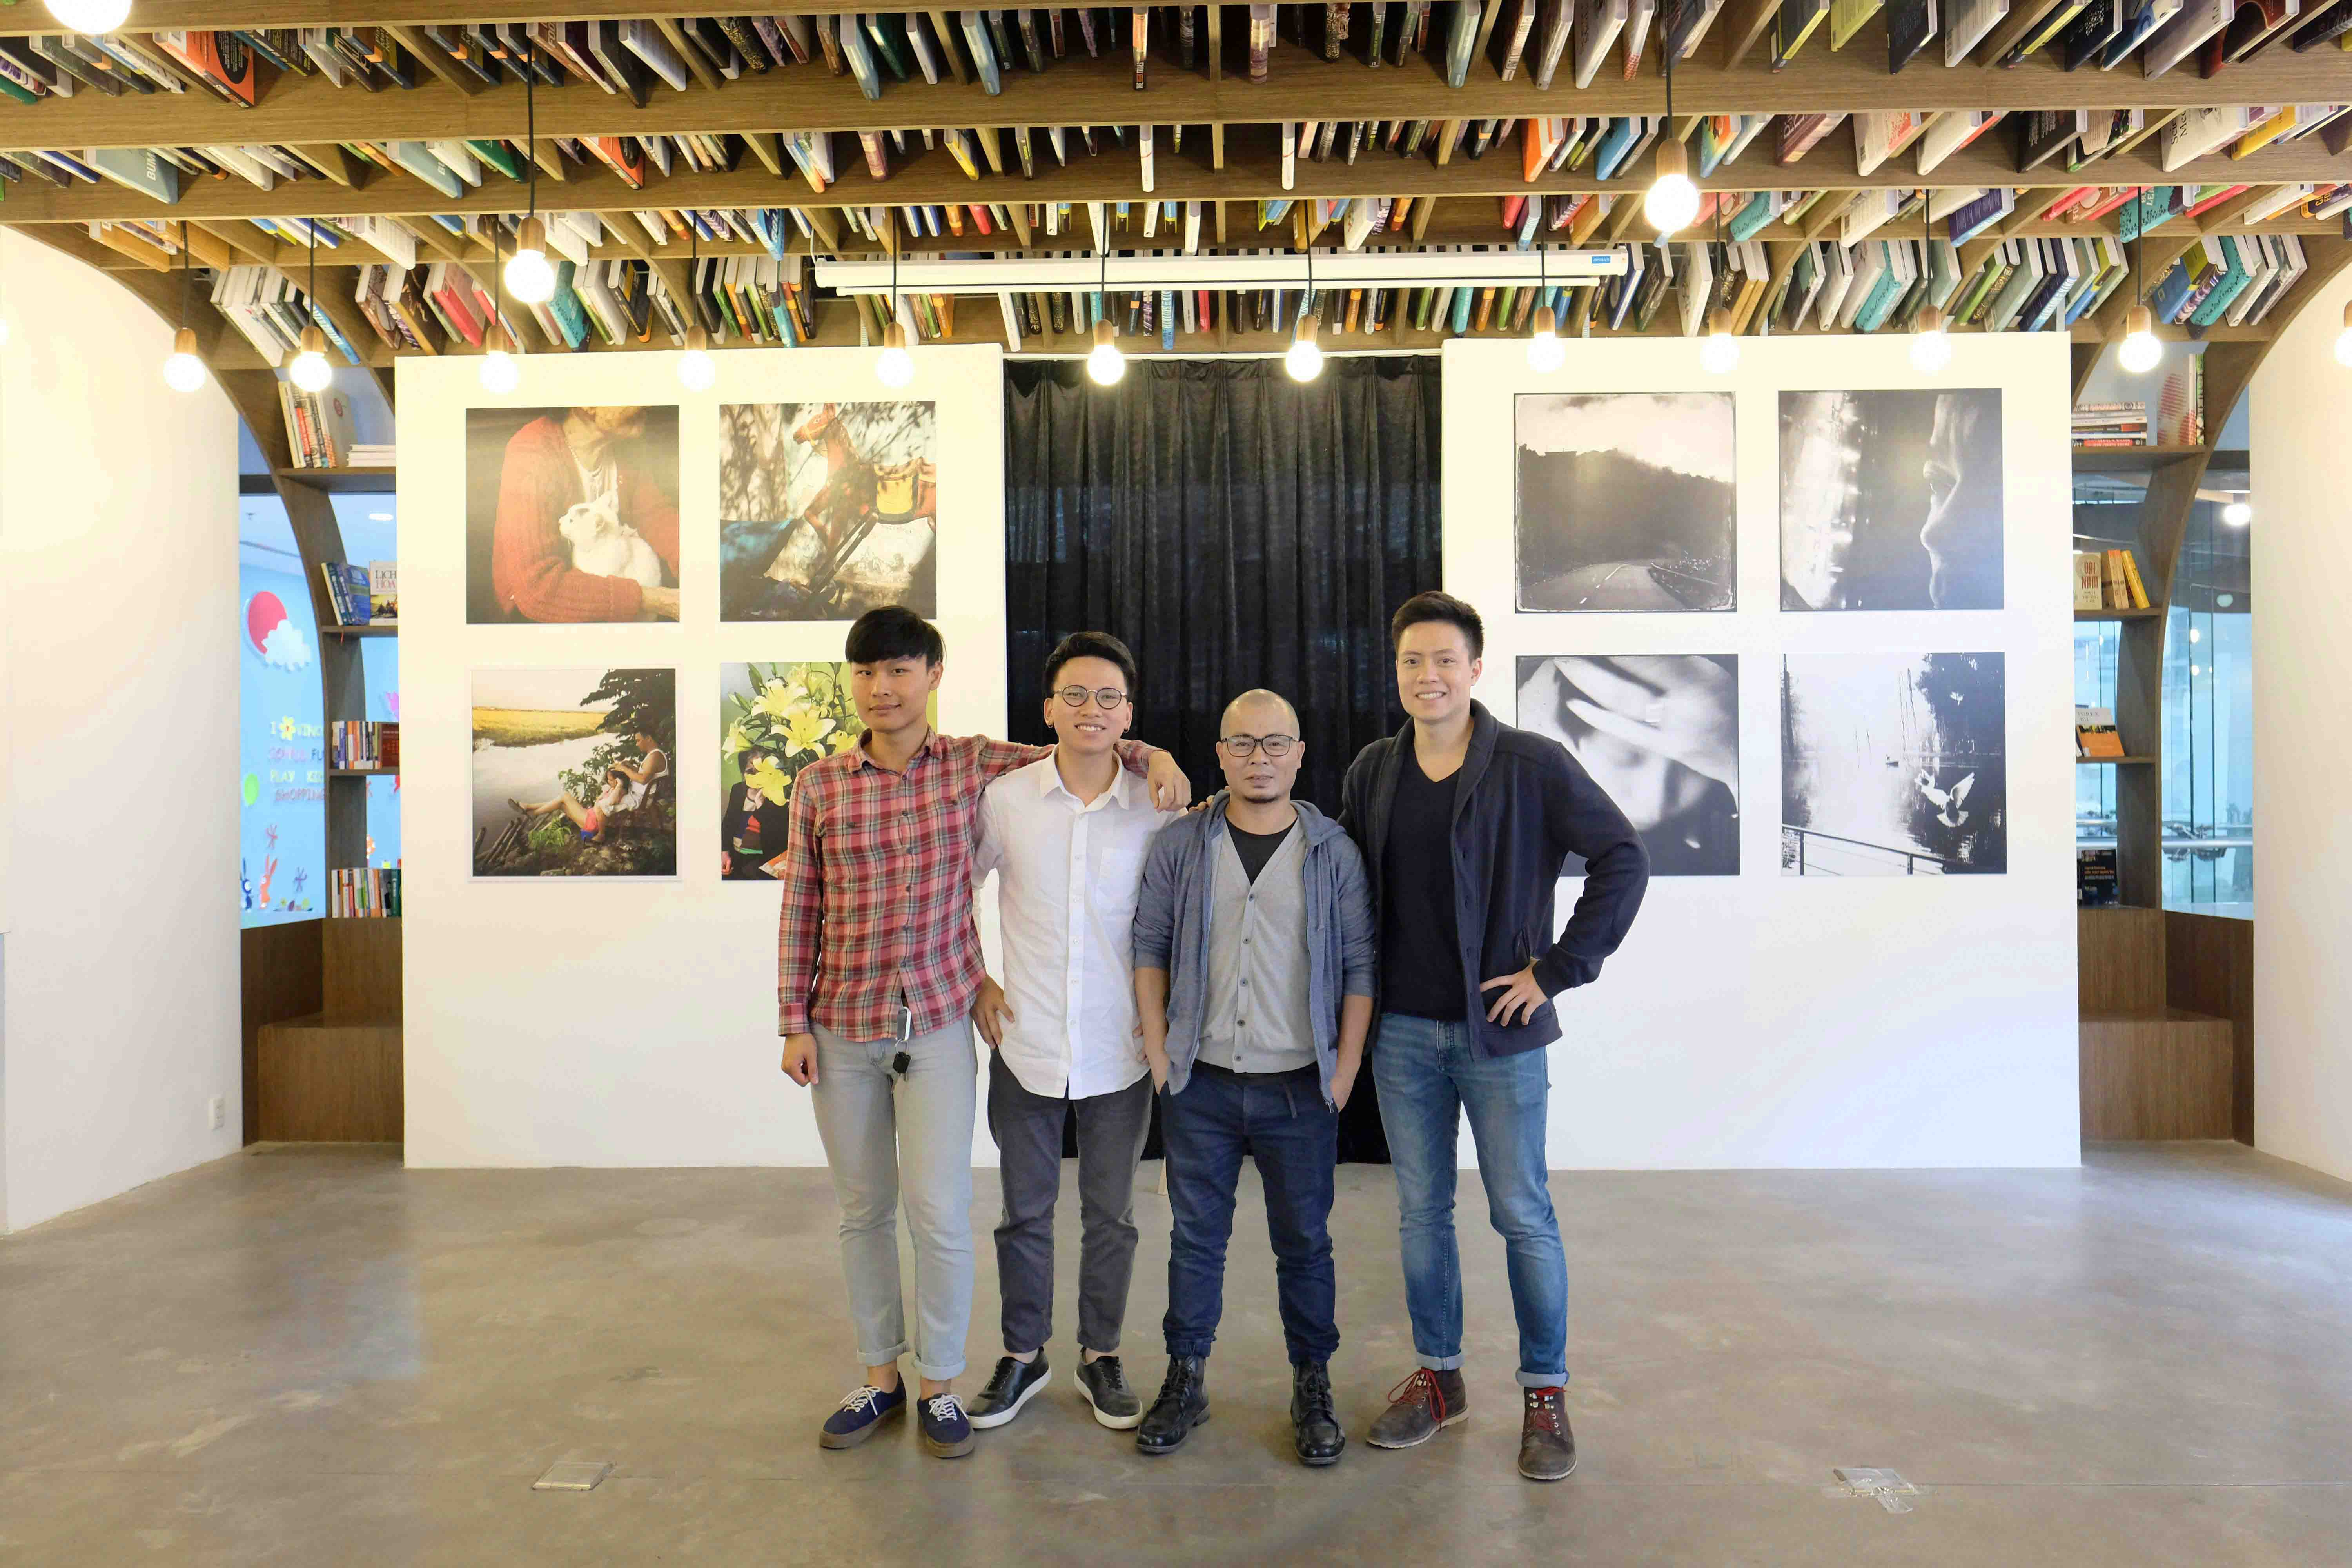 Matca members (from left) Pham Ha Duy Linh, Mai Nguyen Anh, and (far right) Dang Phan Son.